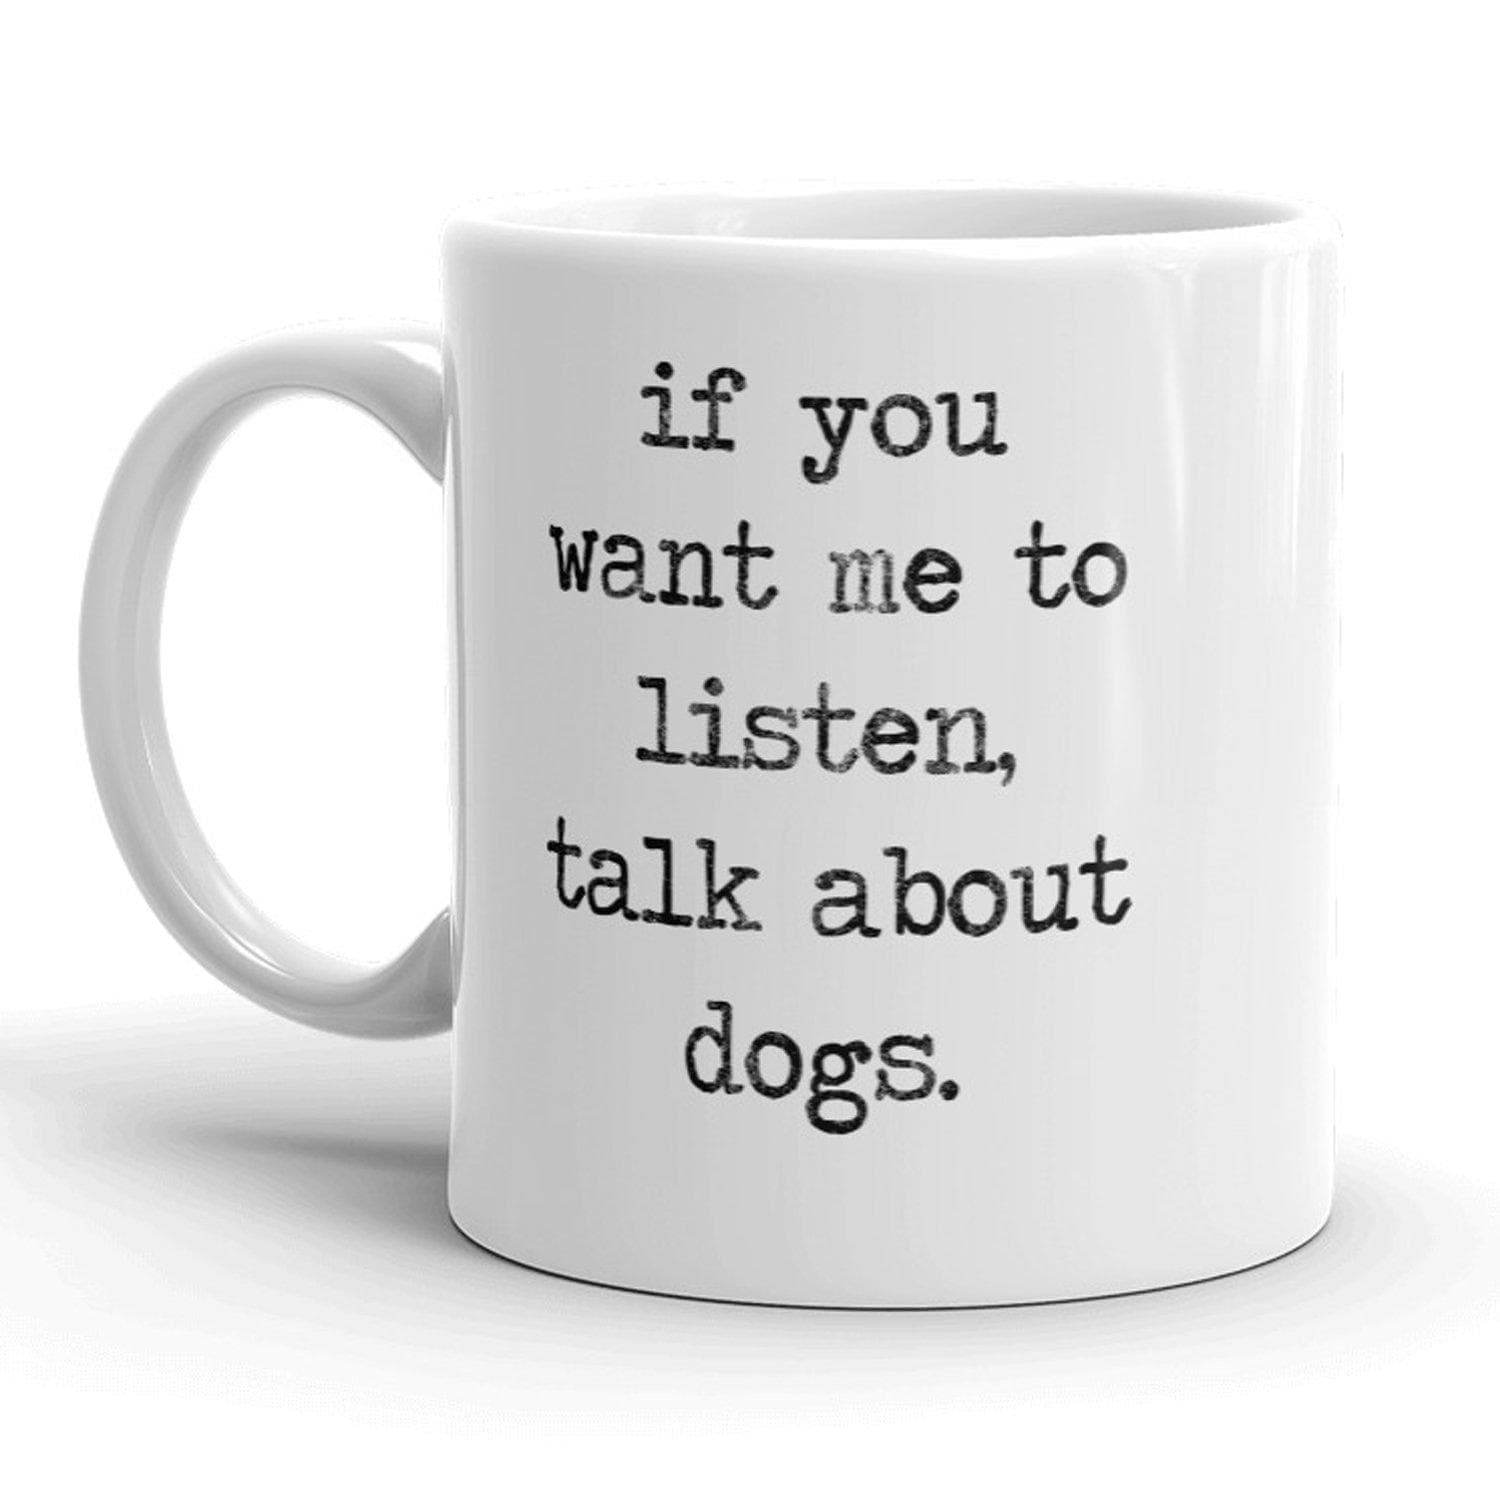 If You Want Me To Listen, Talk About Dogs Mug - Crazy Dog T-Shirts